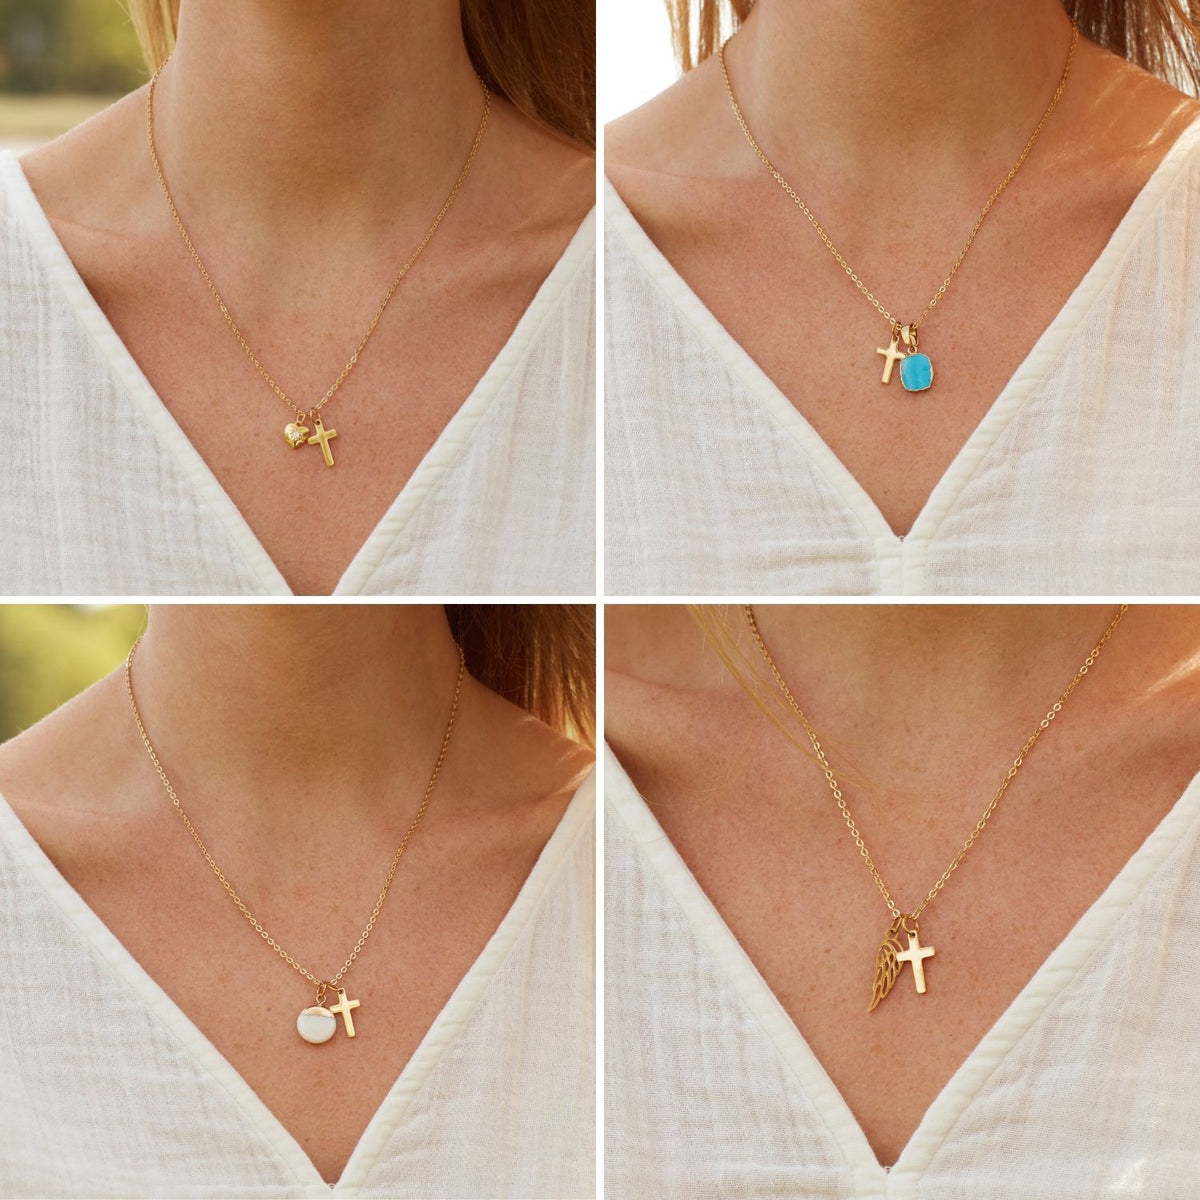 Gift for Daughter | Lifelong Friend | Cross Necklace